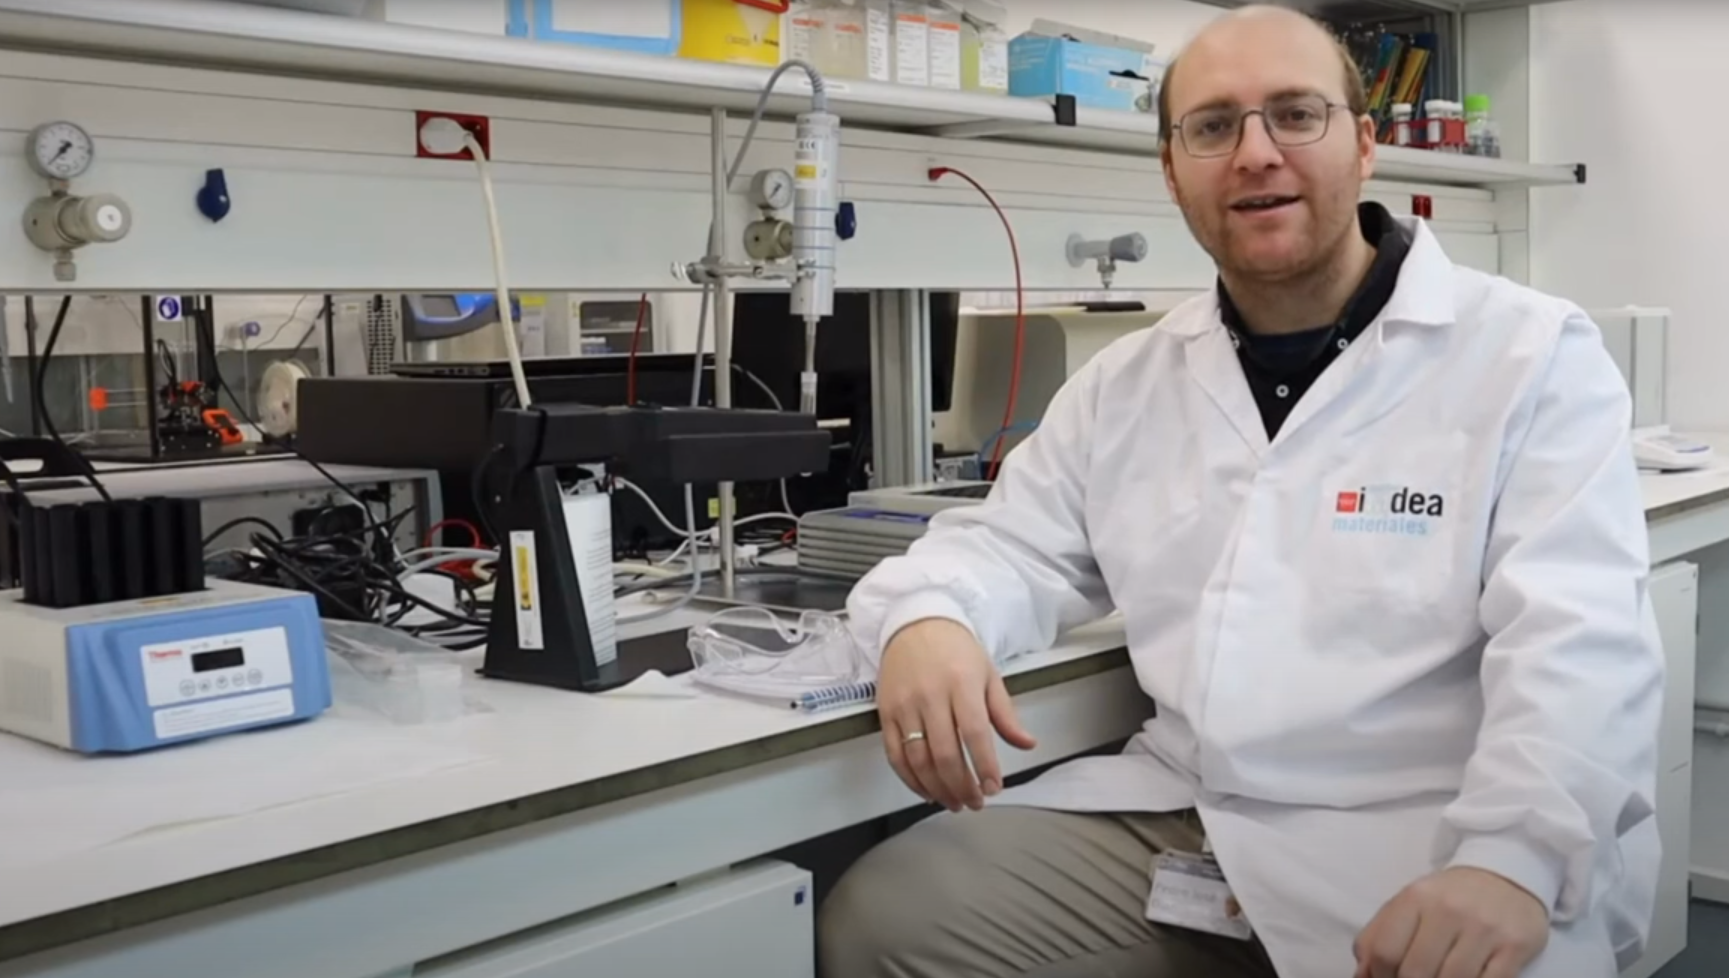 Get to know BIOMET4D researcher with Dr. Pedro Díaz Payno